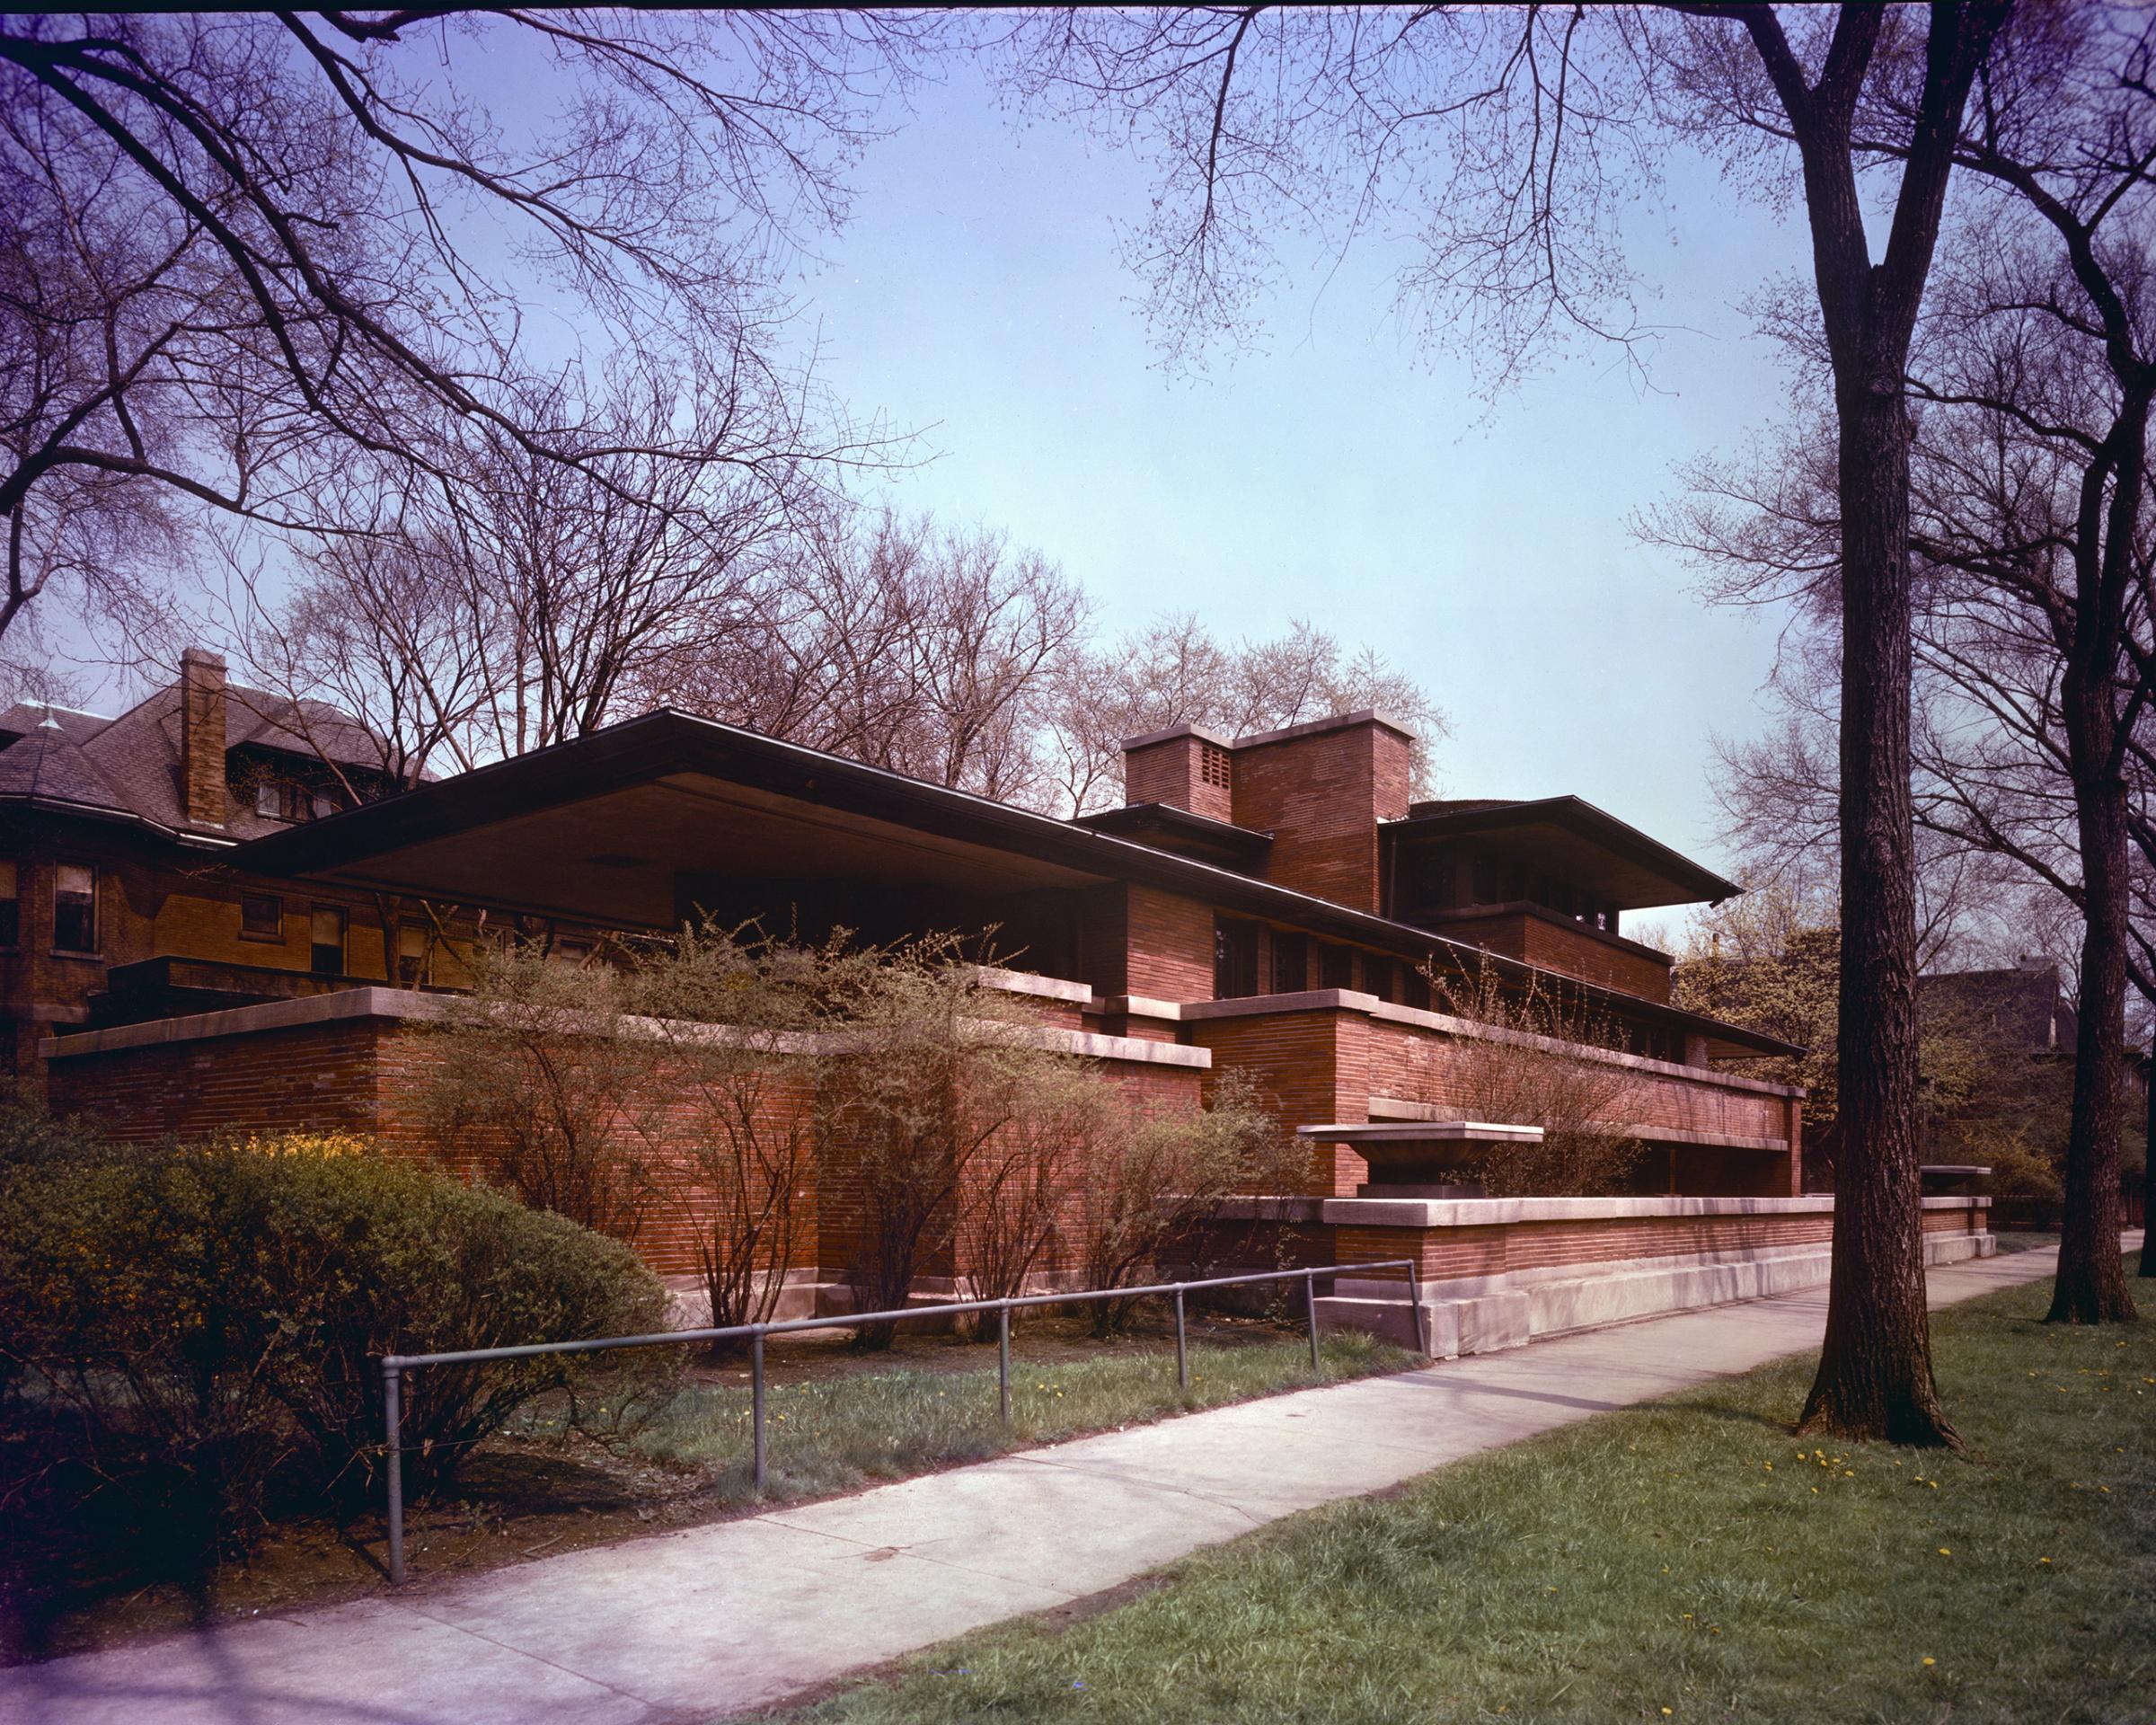 Frank Lloyd Wright's Robie House, Chicago, IL. Built 1909-1910.